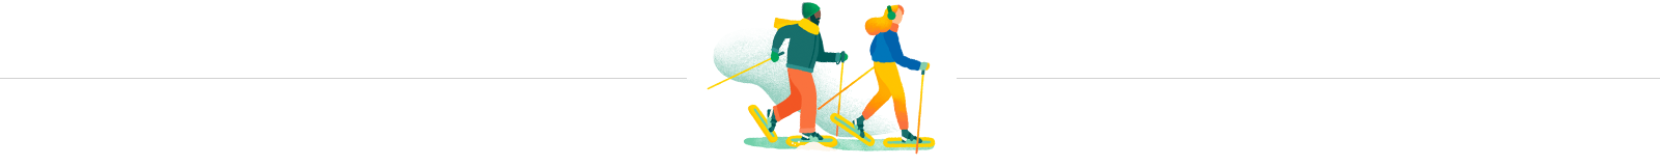 Illustration of 2 people snowshoeing.